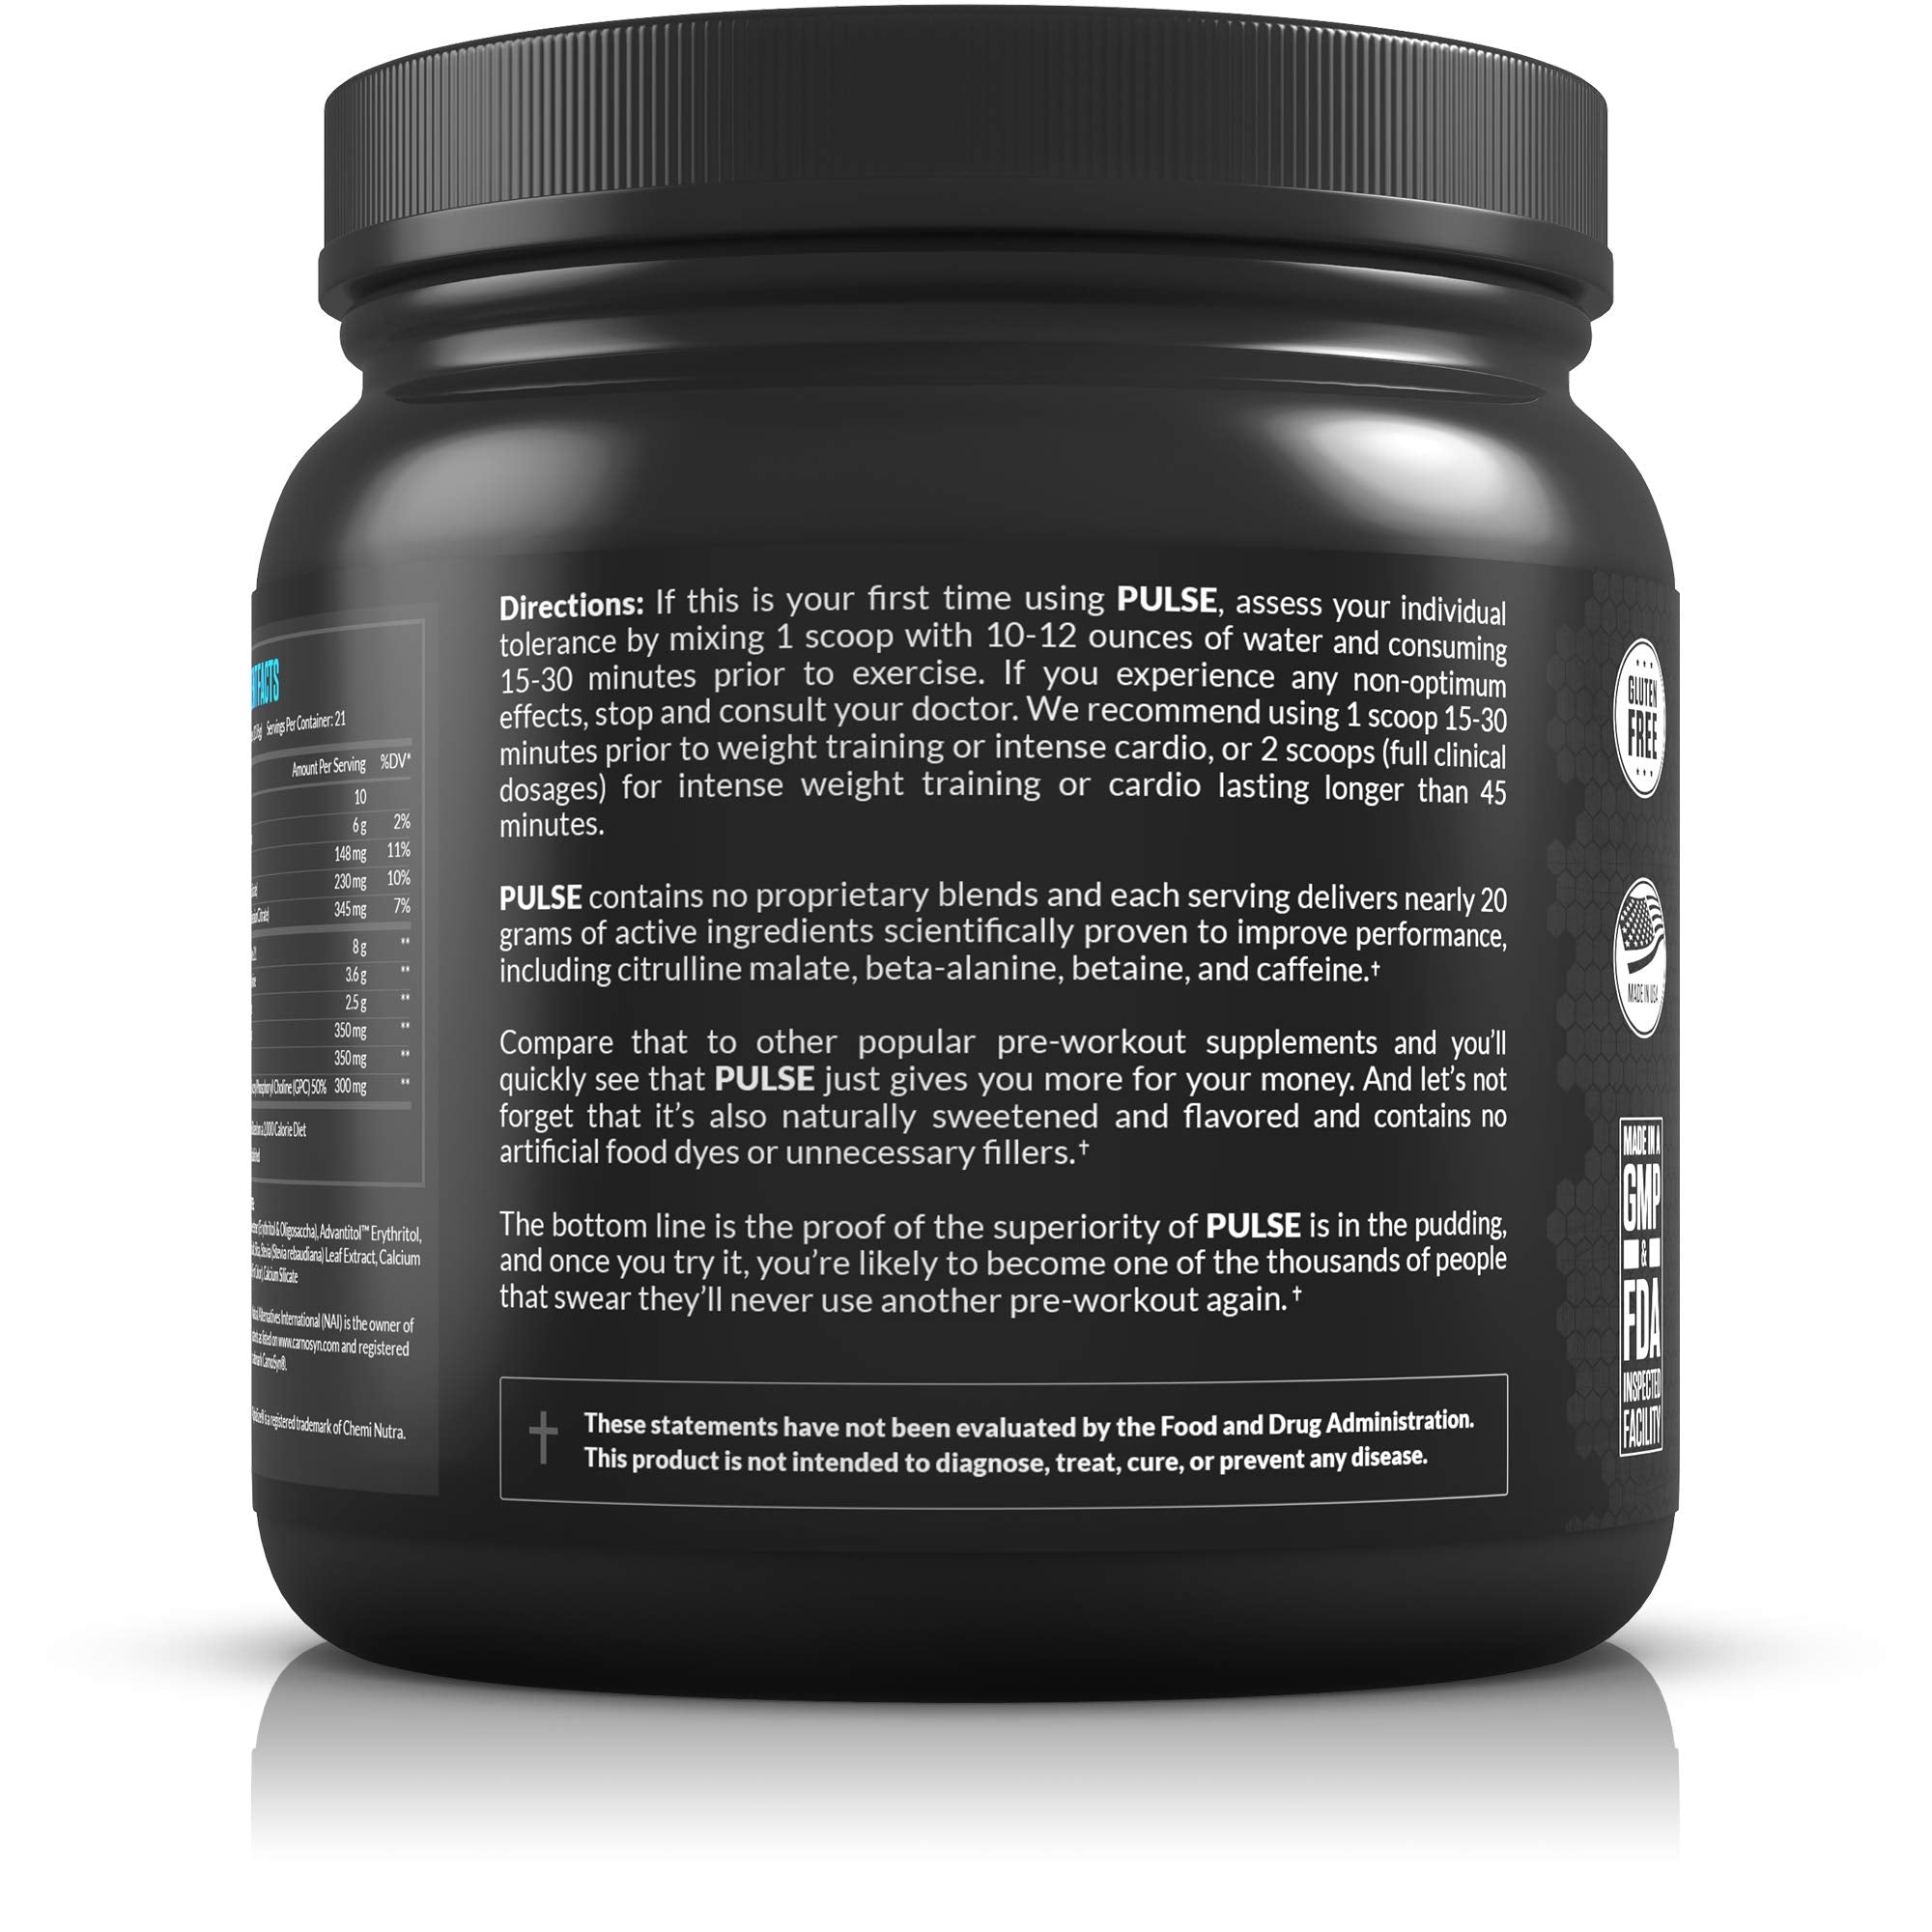 Legion Pulse Pre Workout Supplement - All Natural Nitric Oxide Preworkout Drink to Boost Energy & Endurance. Creatine Free, Naturally Sweetened & Flavored, Safe & Healthy. Fruit Punch, 21 Servings